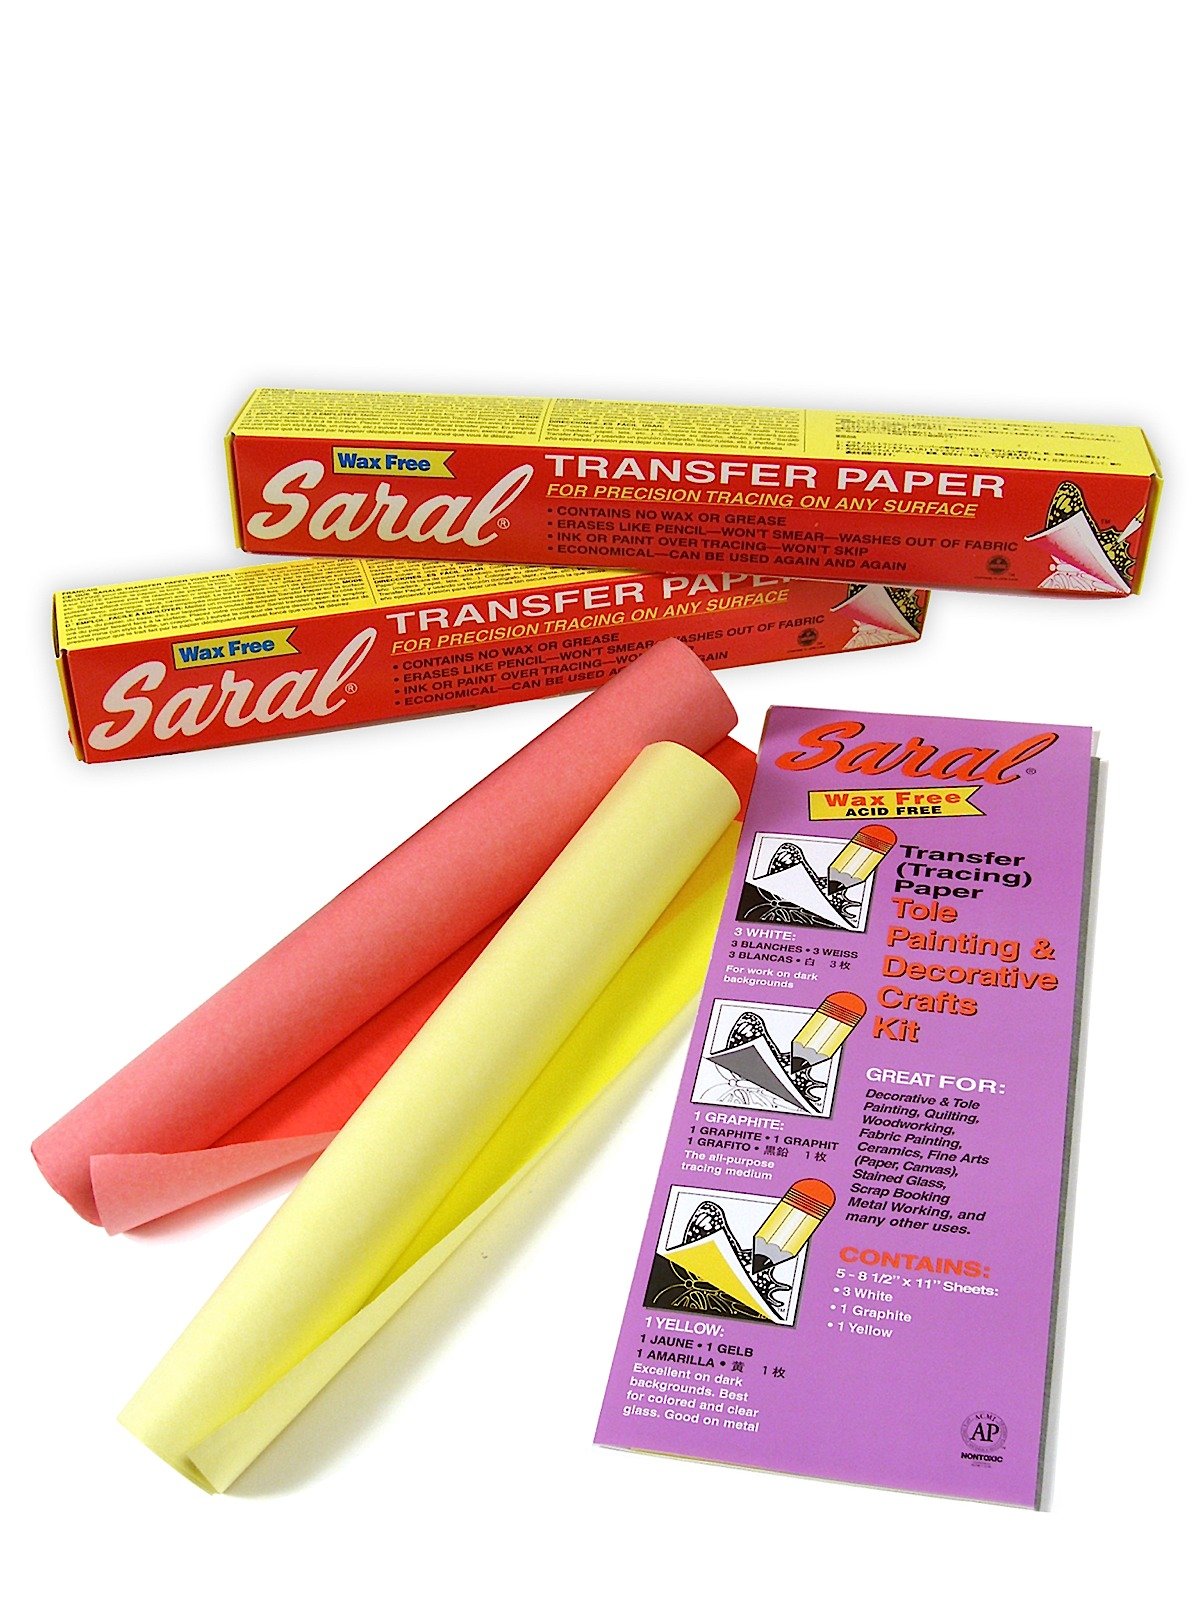 SARAL WAX FREE TRANSFER PAPER SAMPLER ~ 5 COLORS ~ NEW ~ SEALED ~ (6)  AVAILABLE